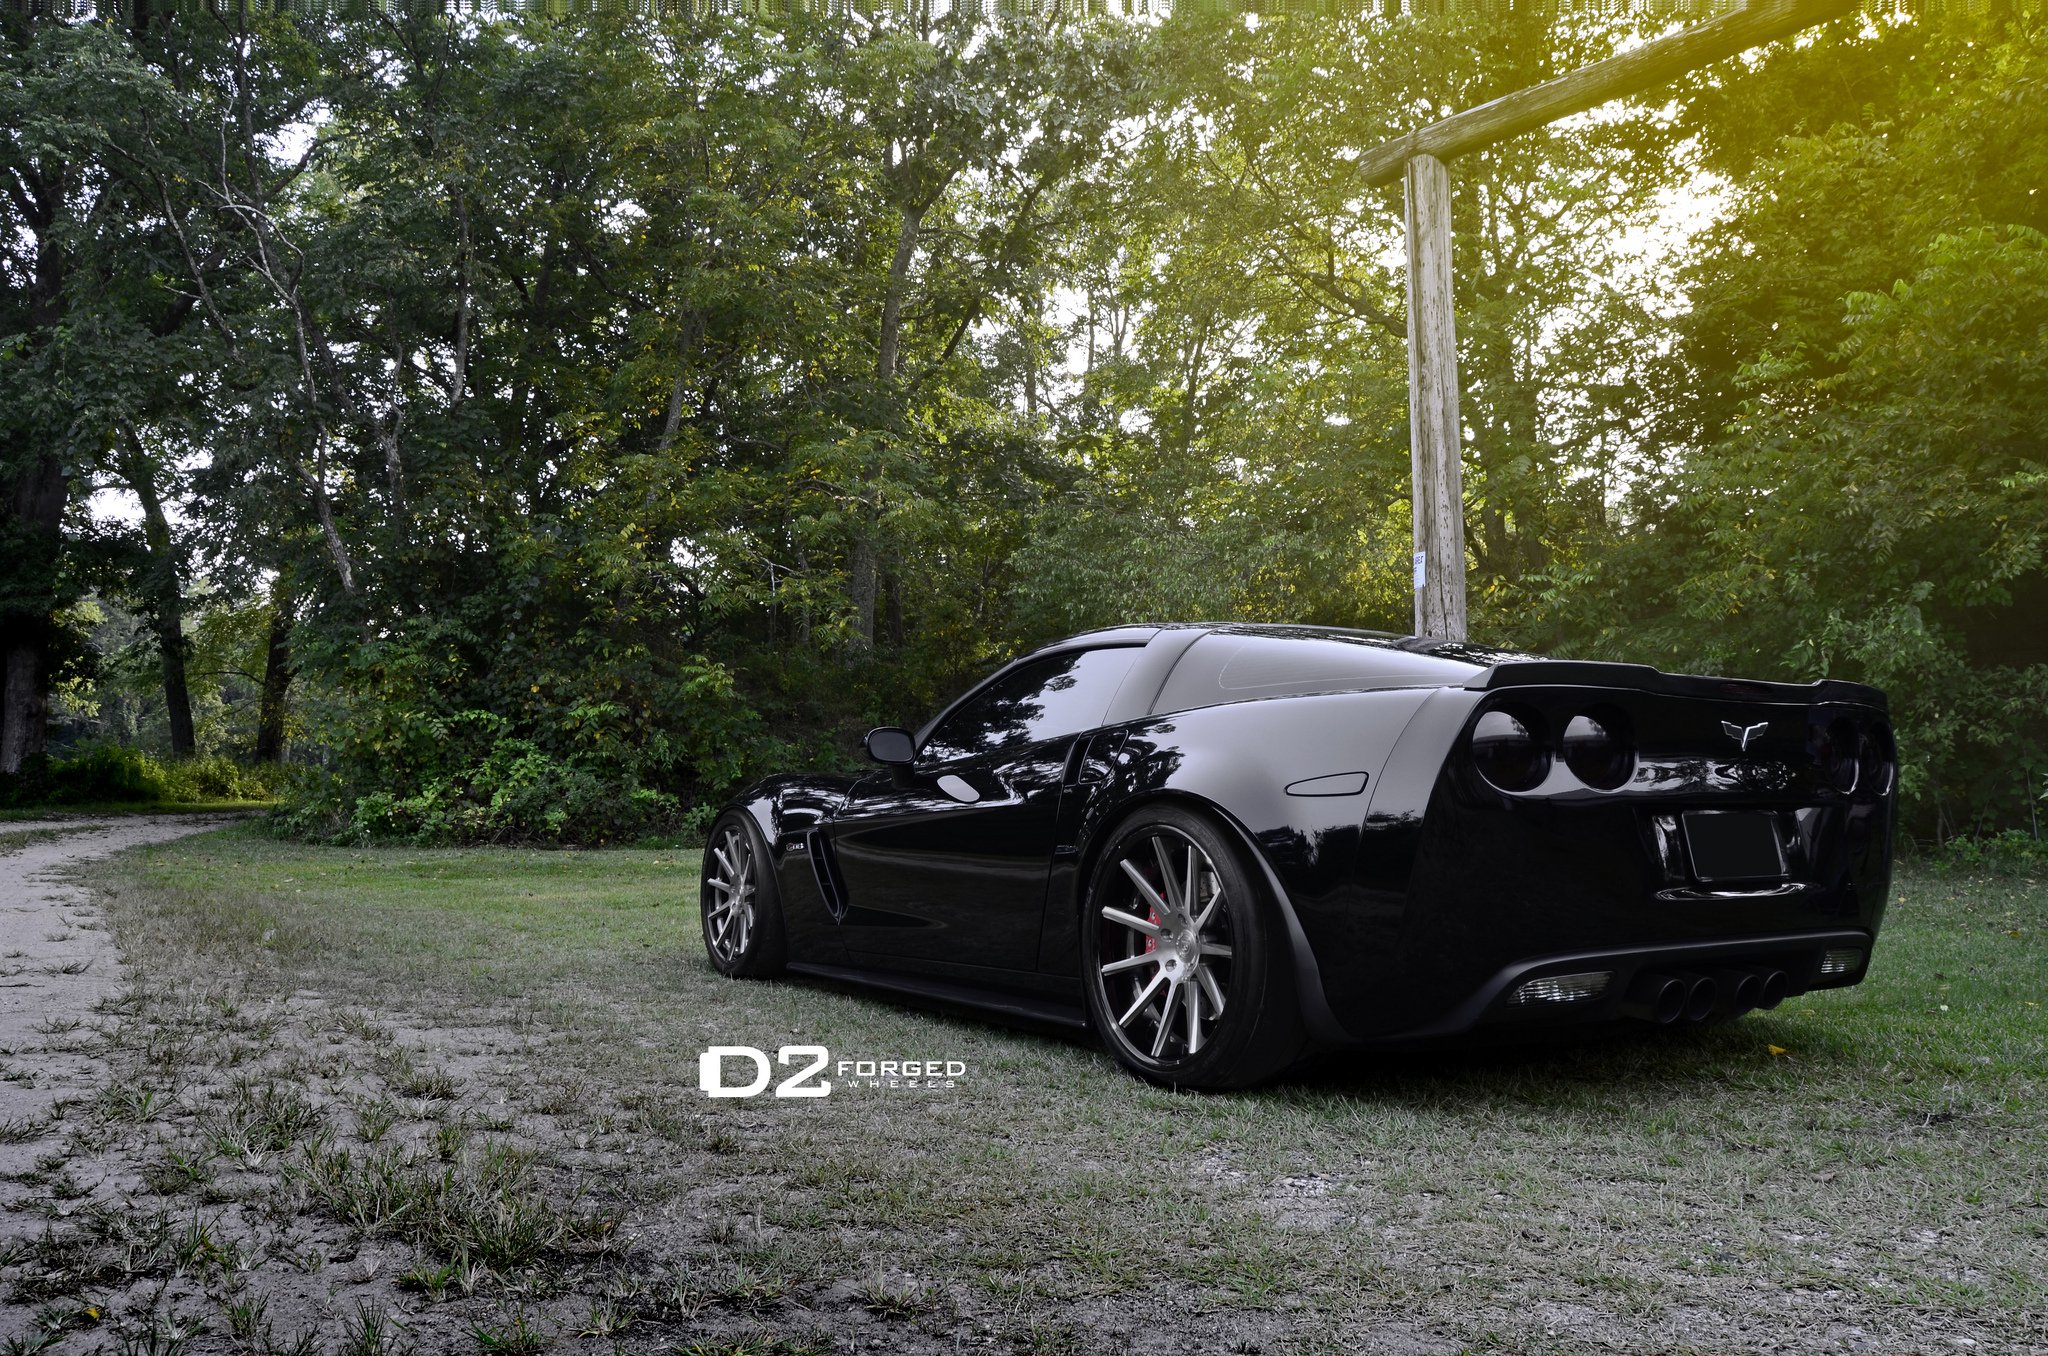 d2forged, Wheels, Tuning, Cars, Bmw, Corvette, C, 6, Coupe Wallpaper